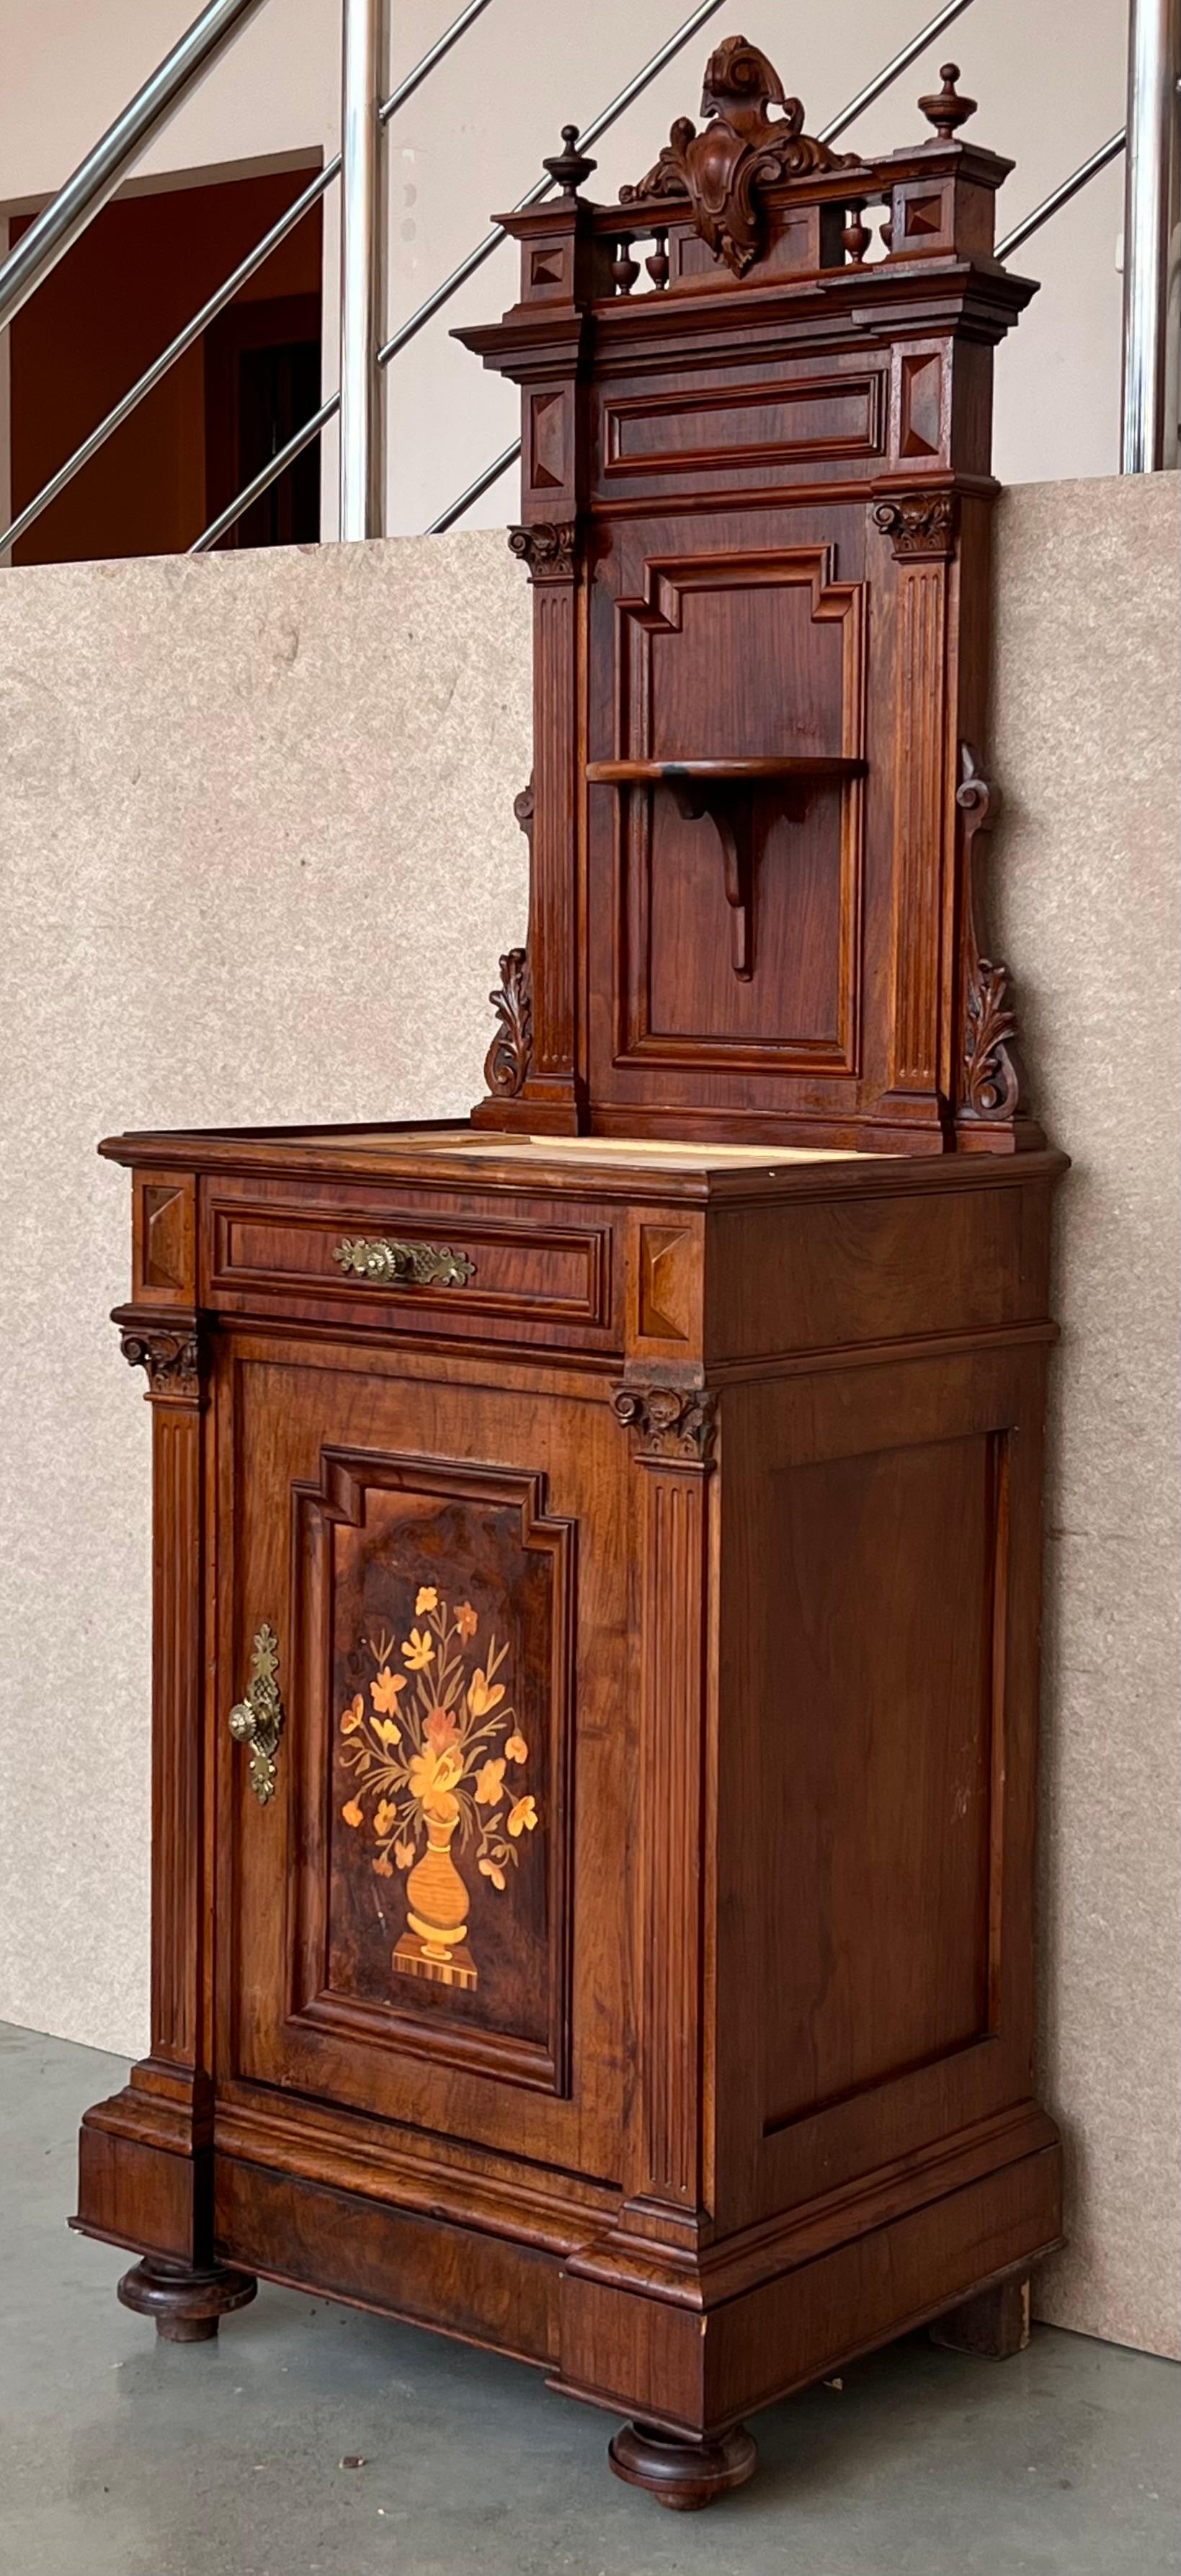 19th century French walnut neoclassical file cabinet is truly an unusual find! Appearing to be, at first glance, a large nightstands, features a single exterior drawer above a cabinet that opens to reveal an interior ceramic compartment. The